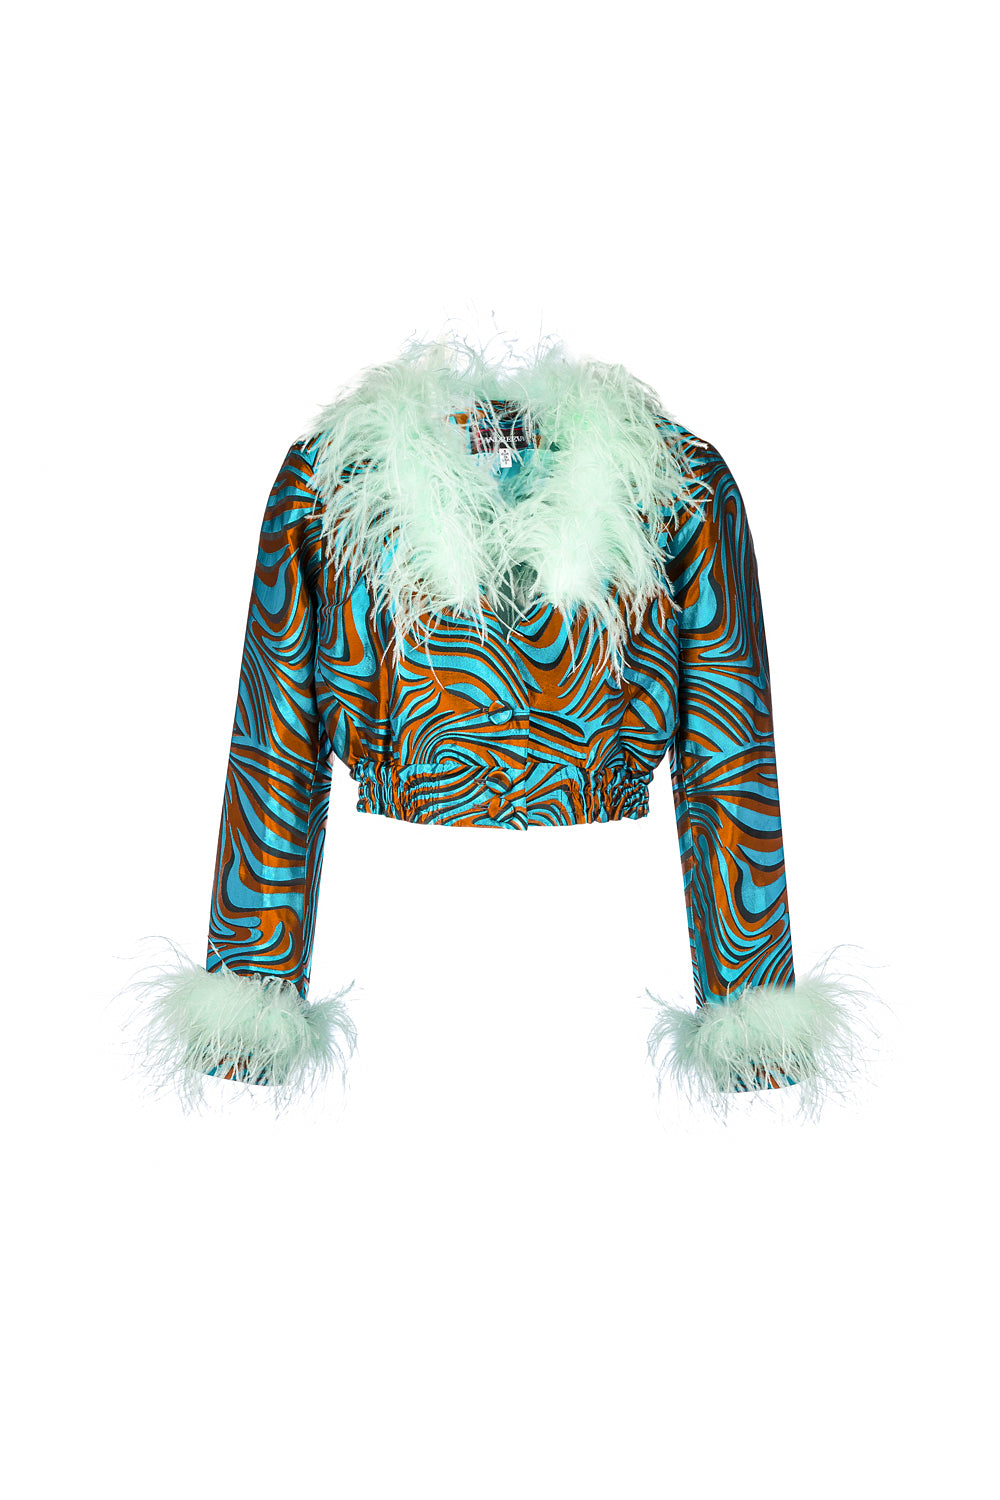 Women’s Green Mint Marilyn Jacket With Feathers Extra Small Andreeva